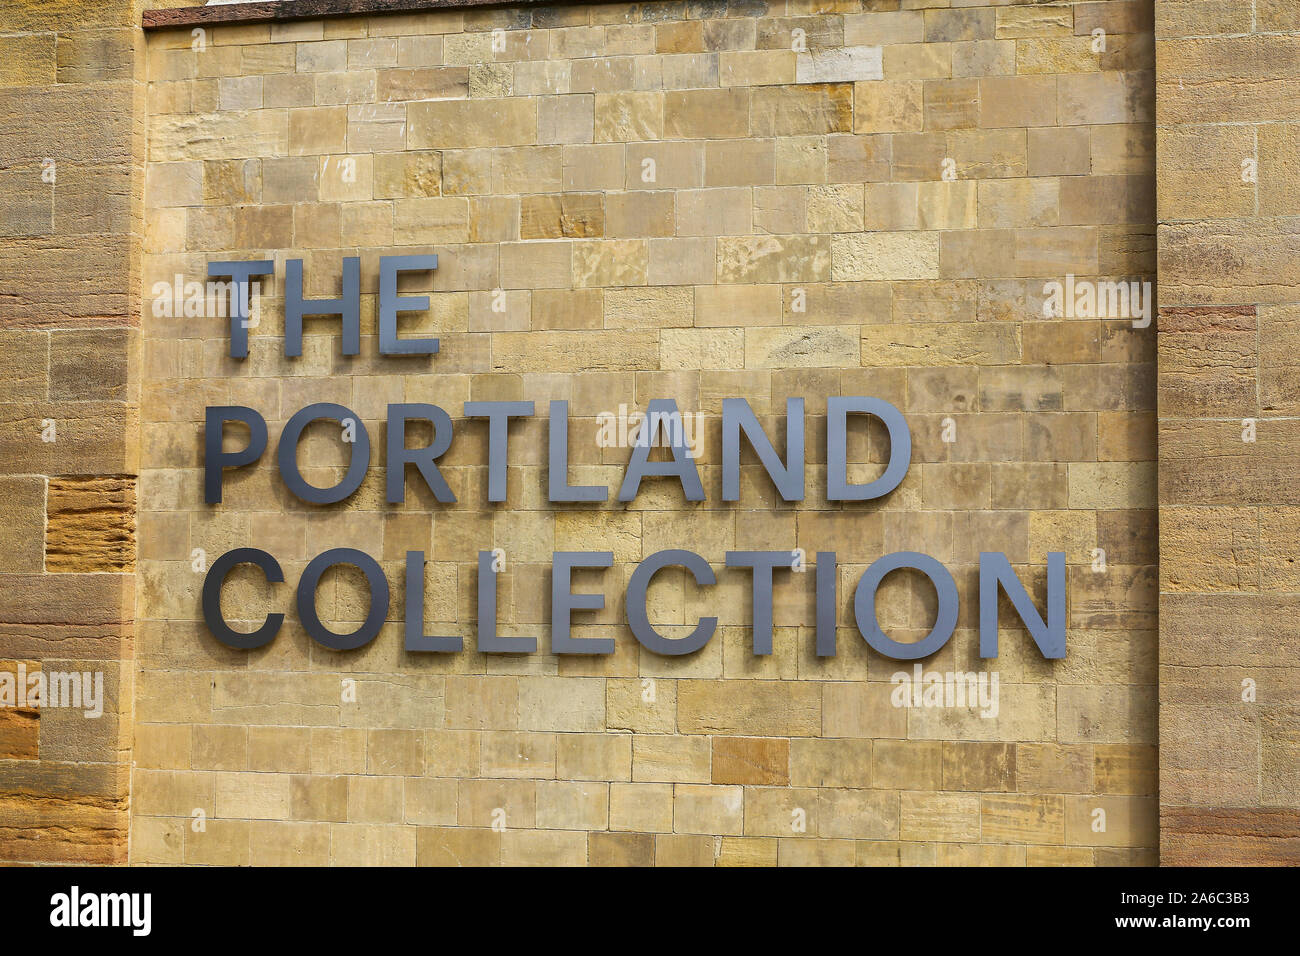 The Portland Collection of art and objects at The Harley Gallery, Welbeck, Creswell, Worksop, Derbyshire, England, UK Stock Photo